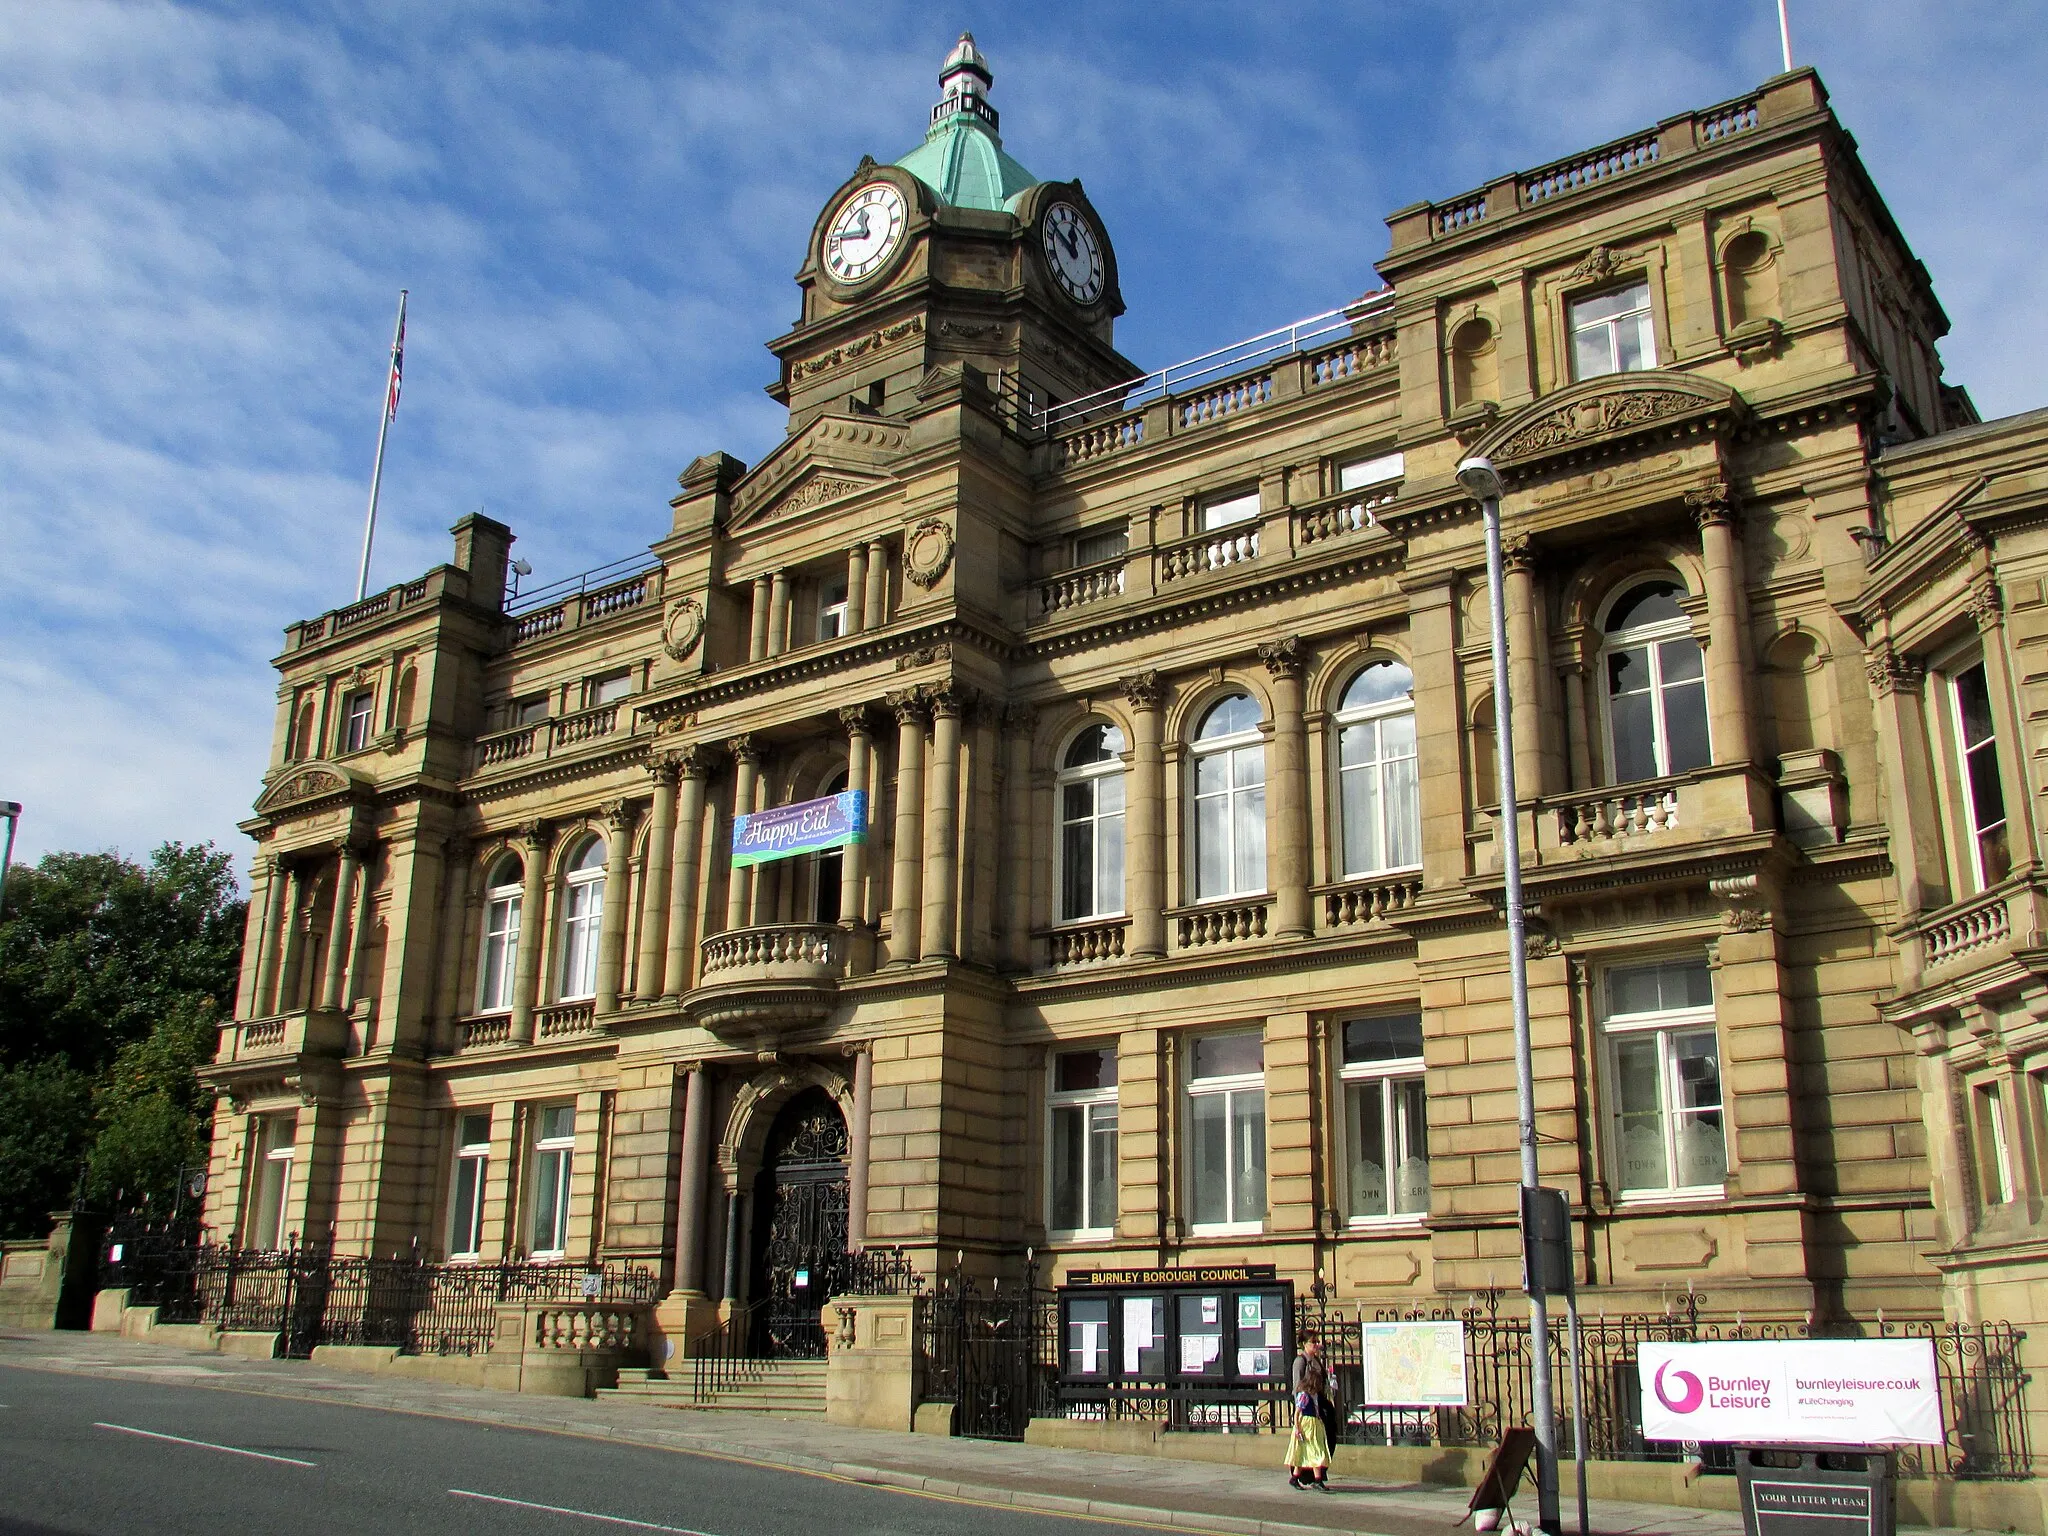 Photo showing: Burnley Town Hall, Manchester Road, Burnley. Designed by Holtom & Fox of Dewsbury and completed in 1888. It originally incorporated a police station, Magistrate's Court and public baths (the latter demolished in 1975).